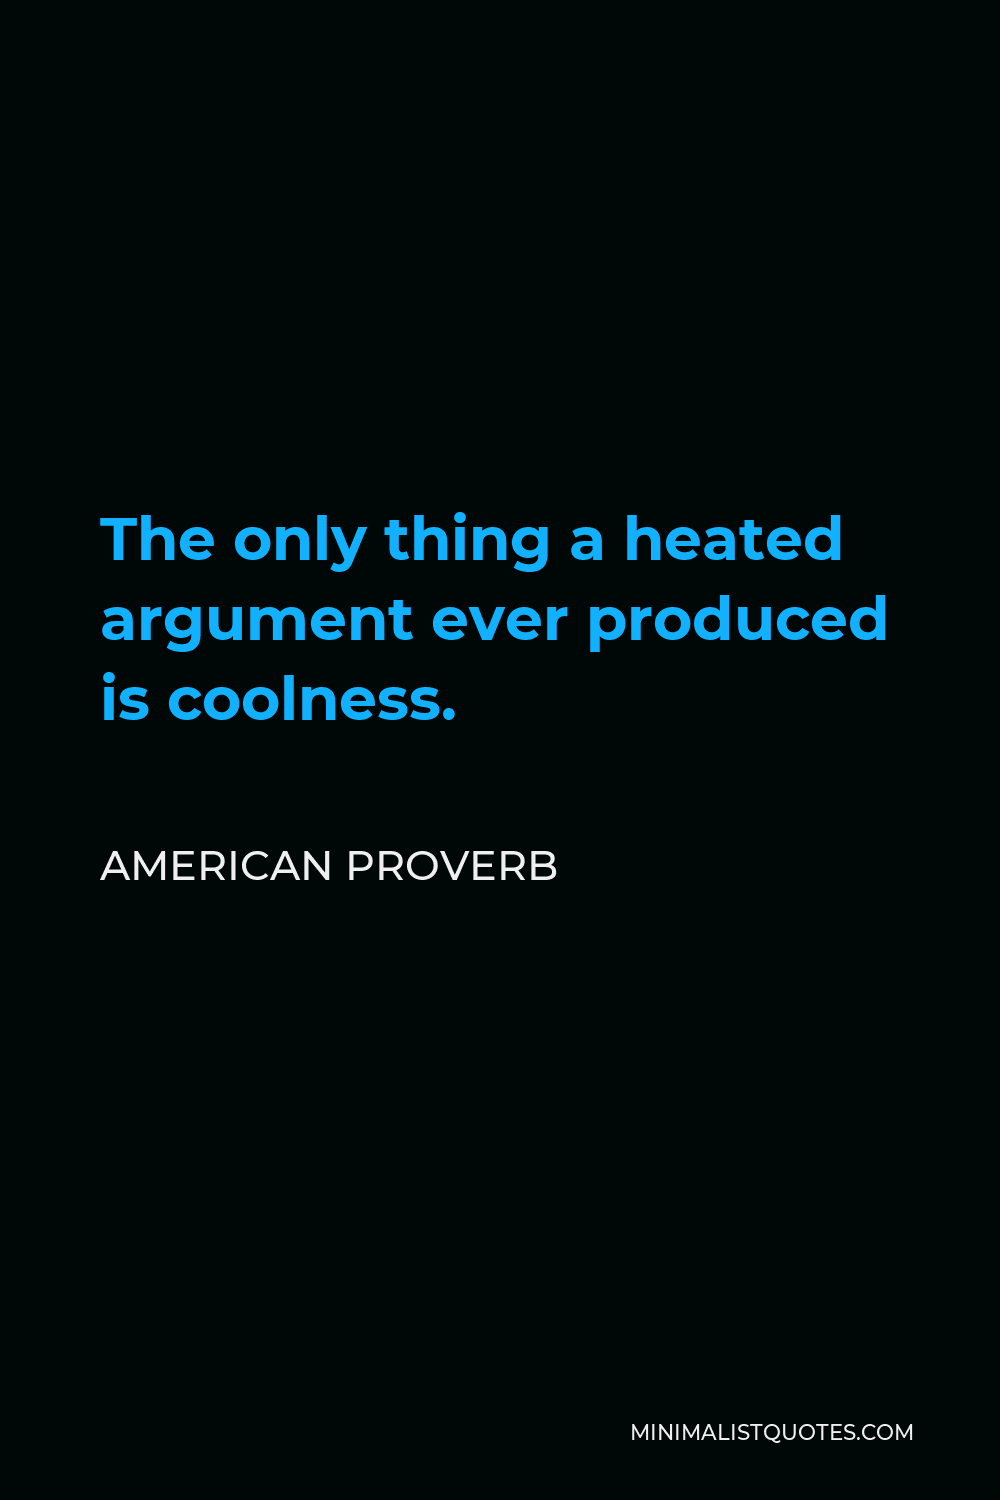 American Proverb Quote - The only thing a heated argument ever produced is coolness.